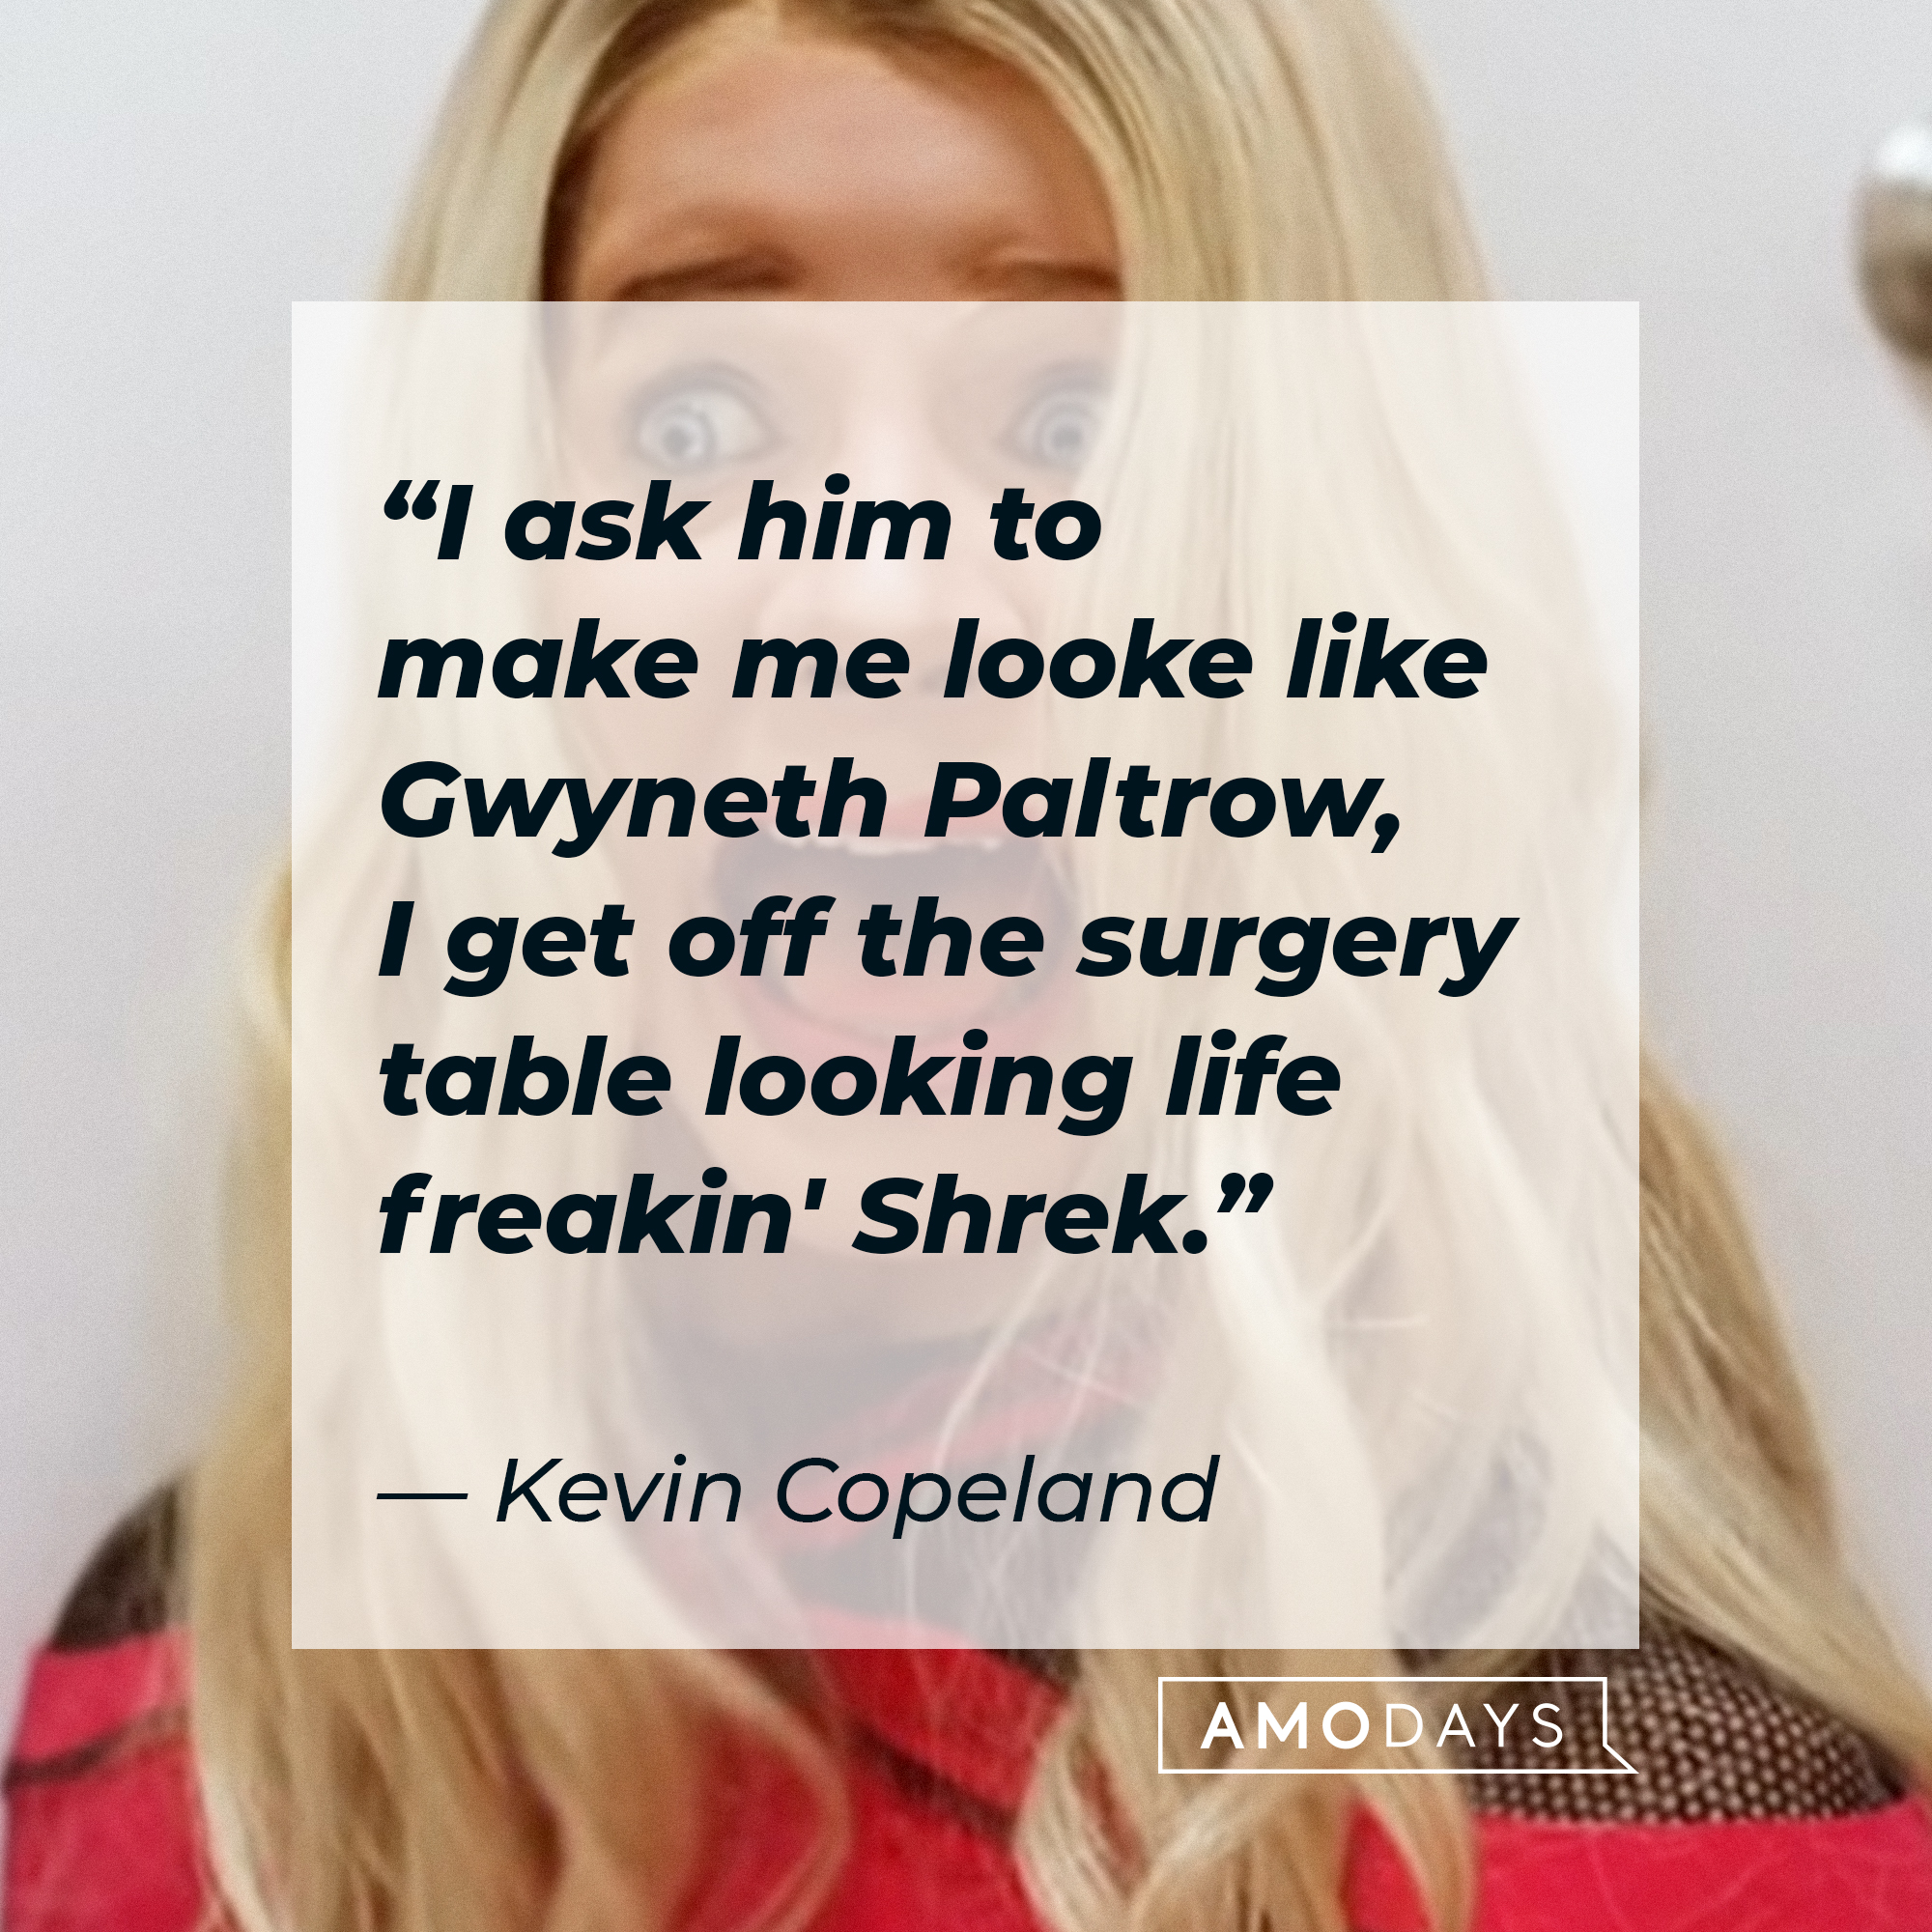 An image of one of the Copeland brothers in disguise with Kevin Copeland’s quote: “I ask him to make me looked like Gwyneth Paltrow, I get off the surgery table looking life freakin' Shrek.” | Source: Sony Pictures Entertainment